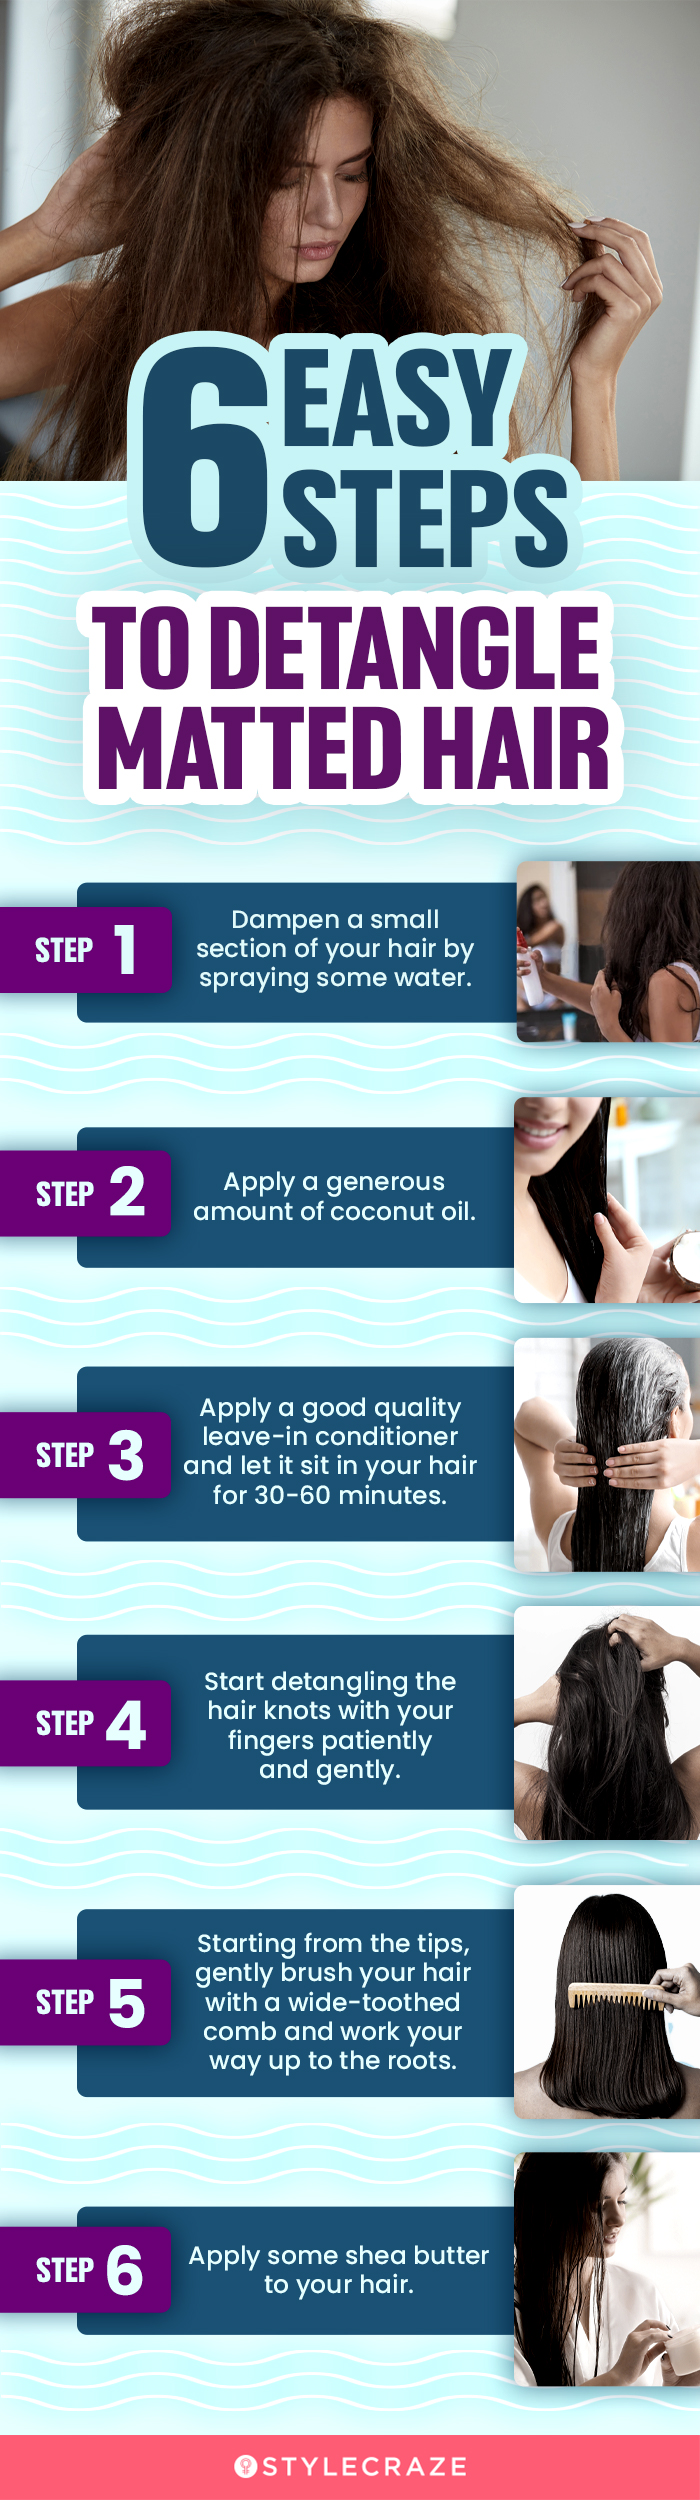 6 easy steps to detangle matted hair (infographic) (infographic)